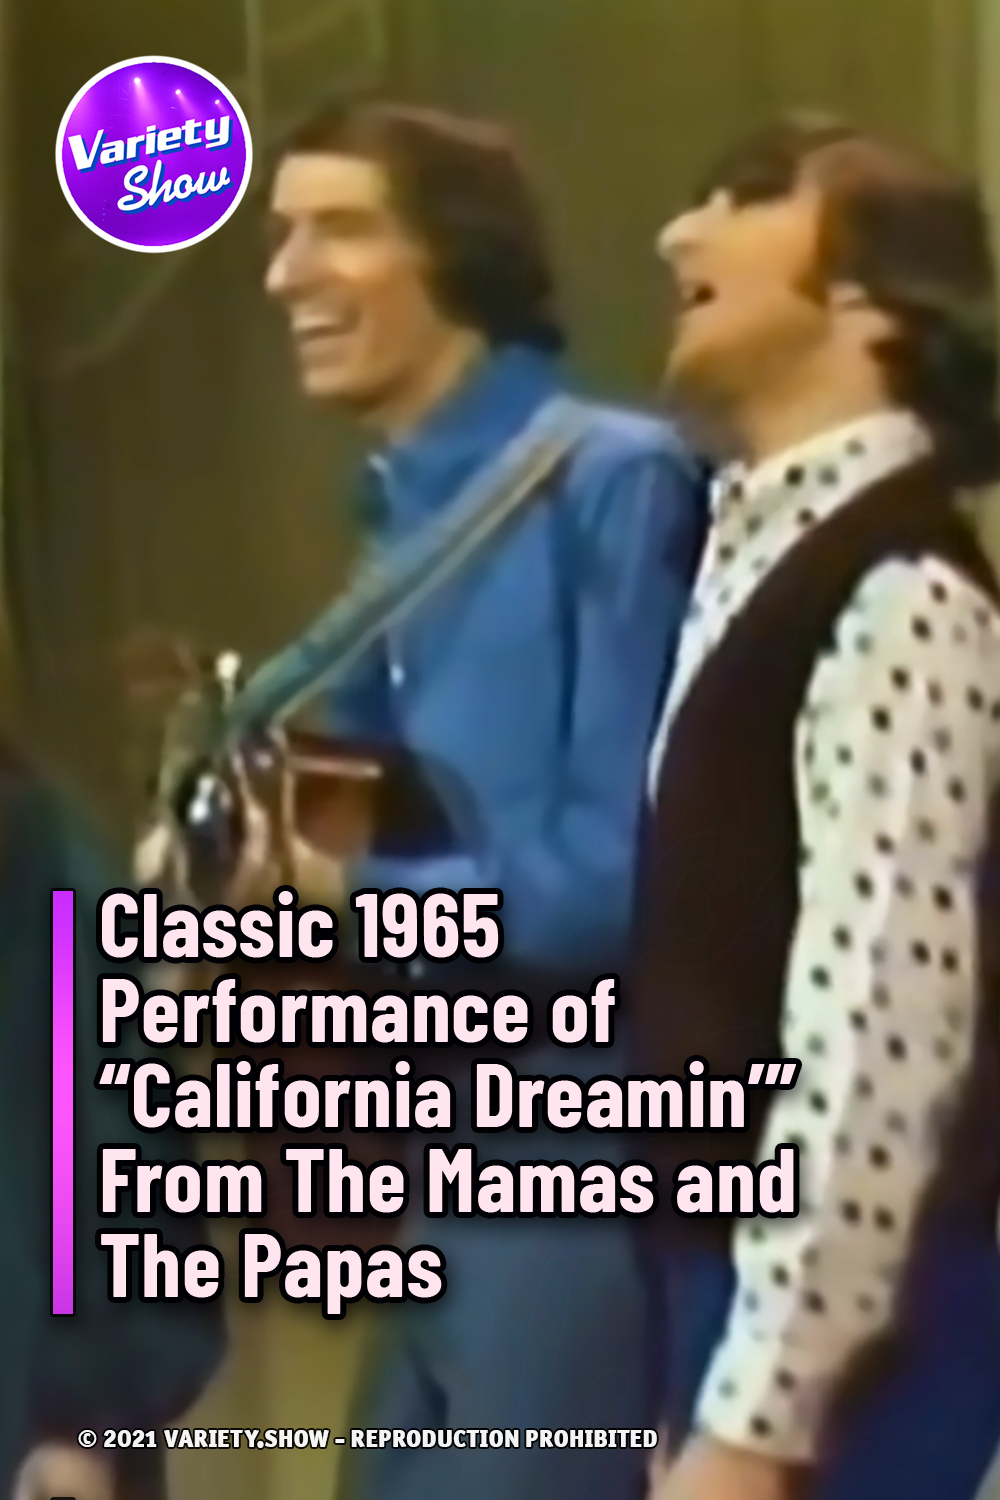 Classic 1965 Performance of “California Dreamin’” From The Mamas and The Papas